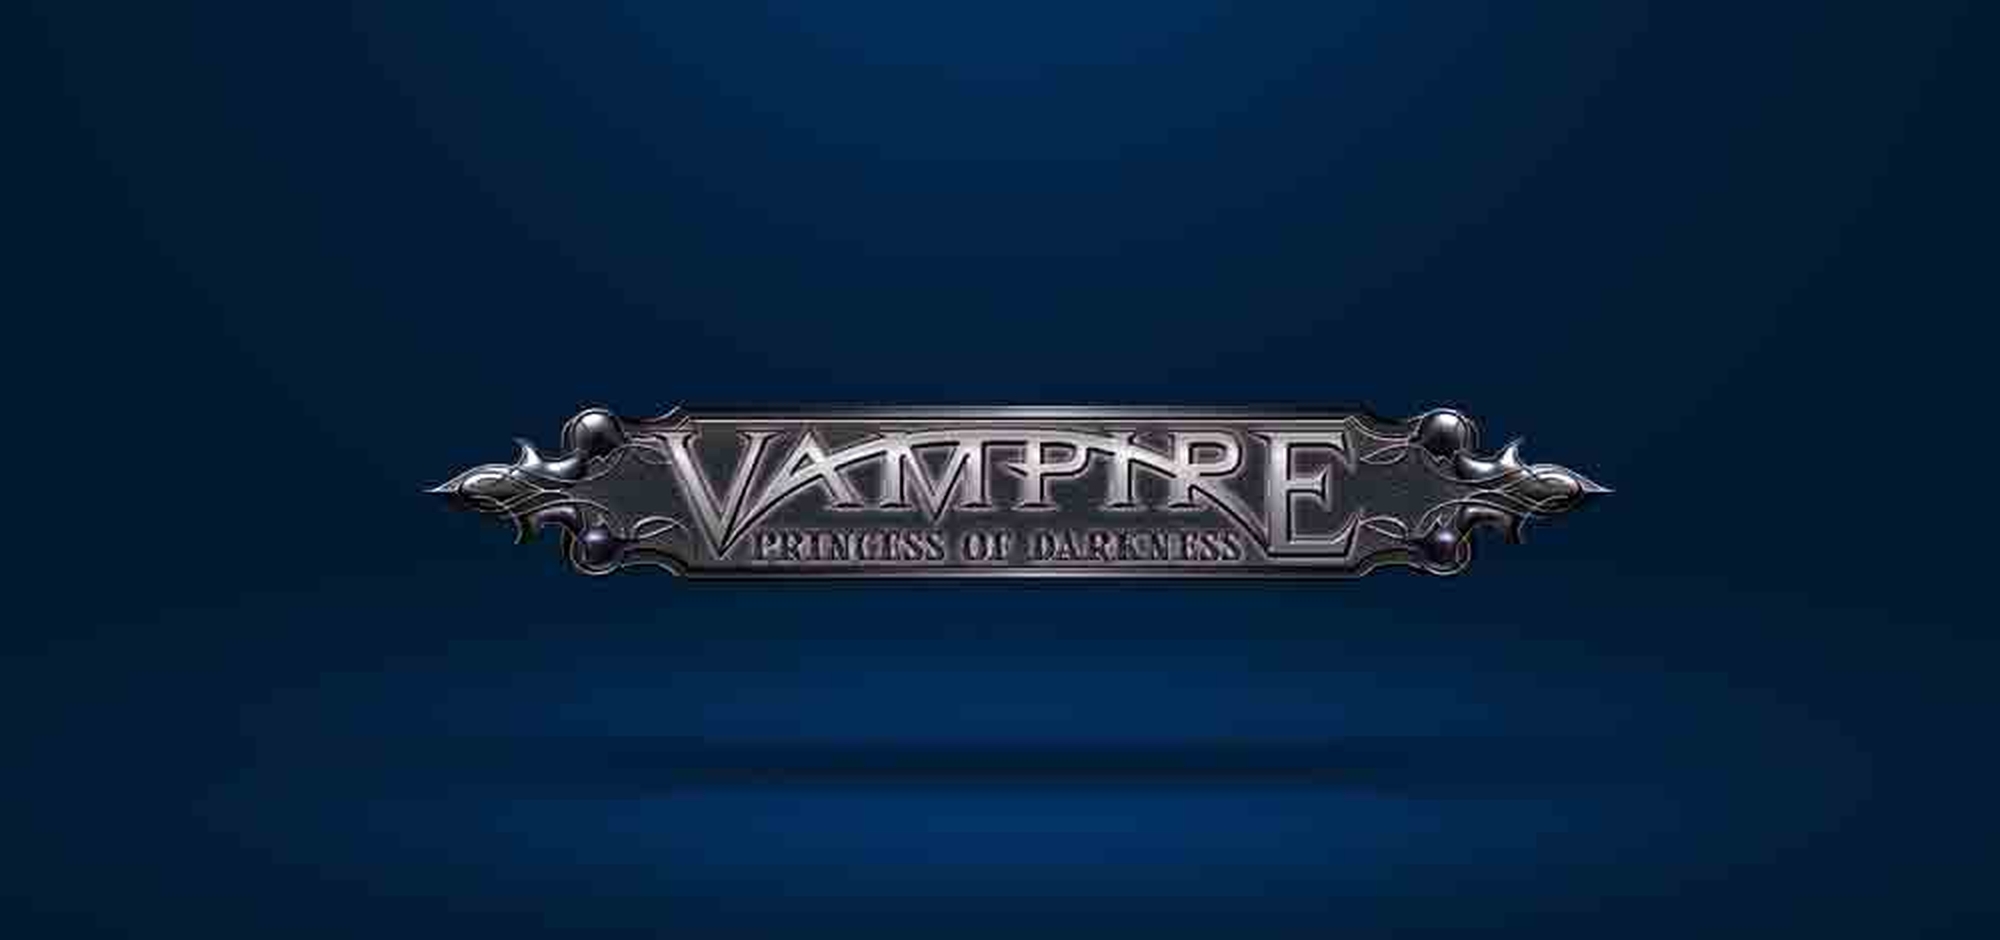 The Vampire Princess of Darkness Online Slot Demo Game by Playtech